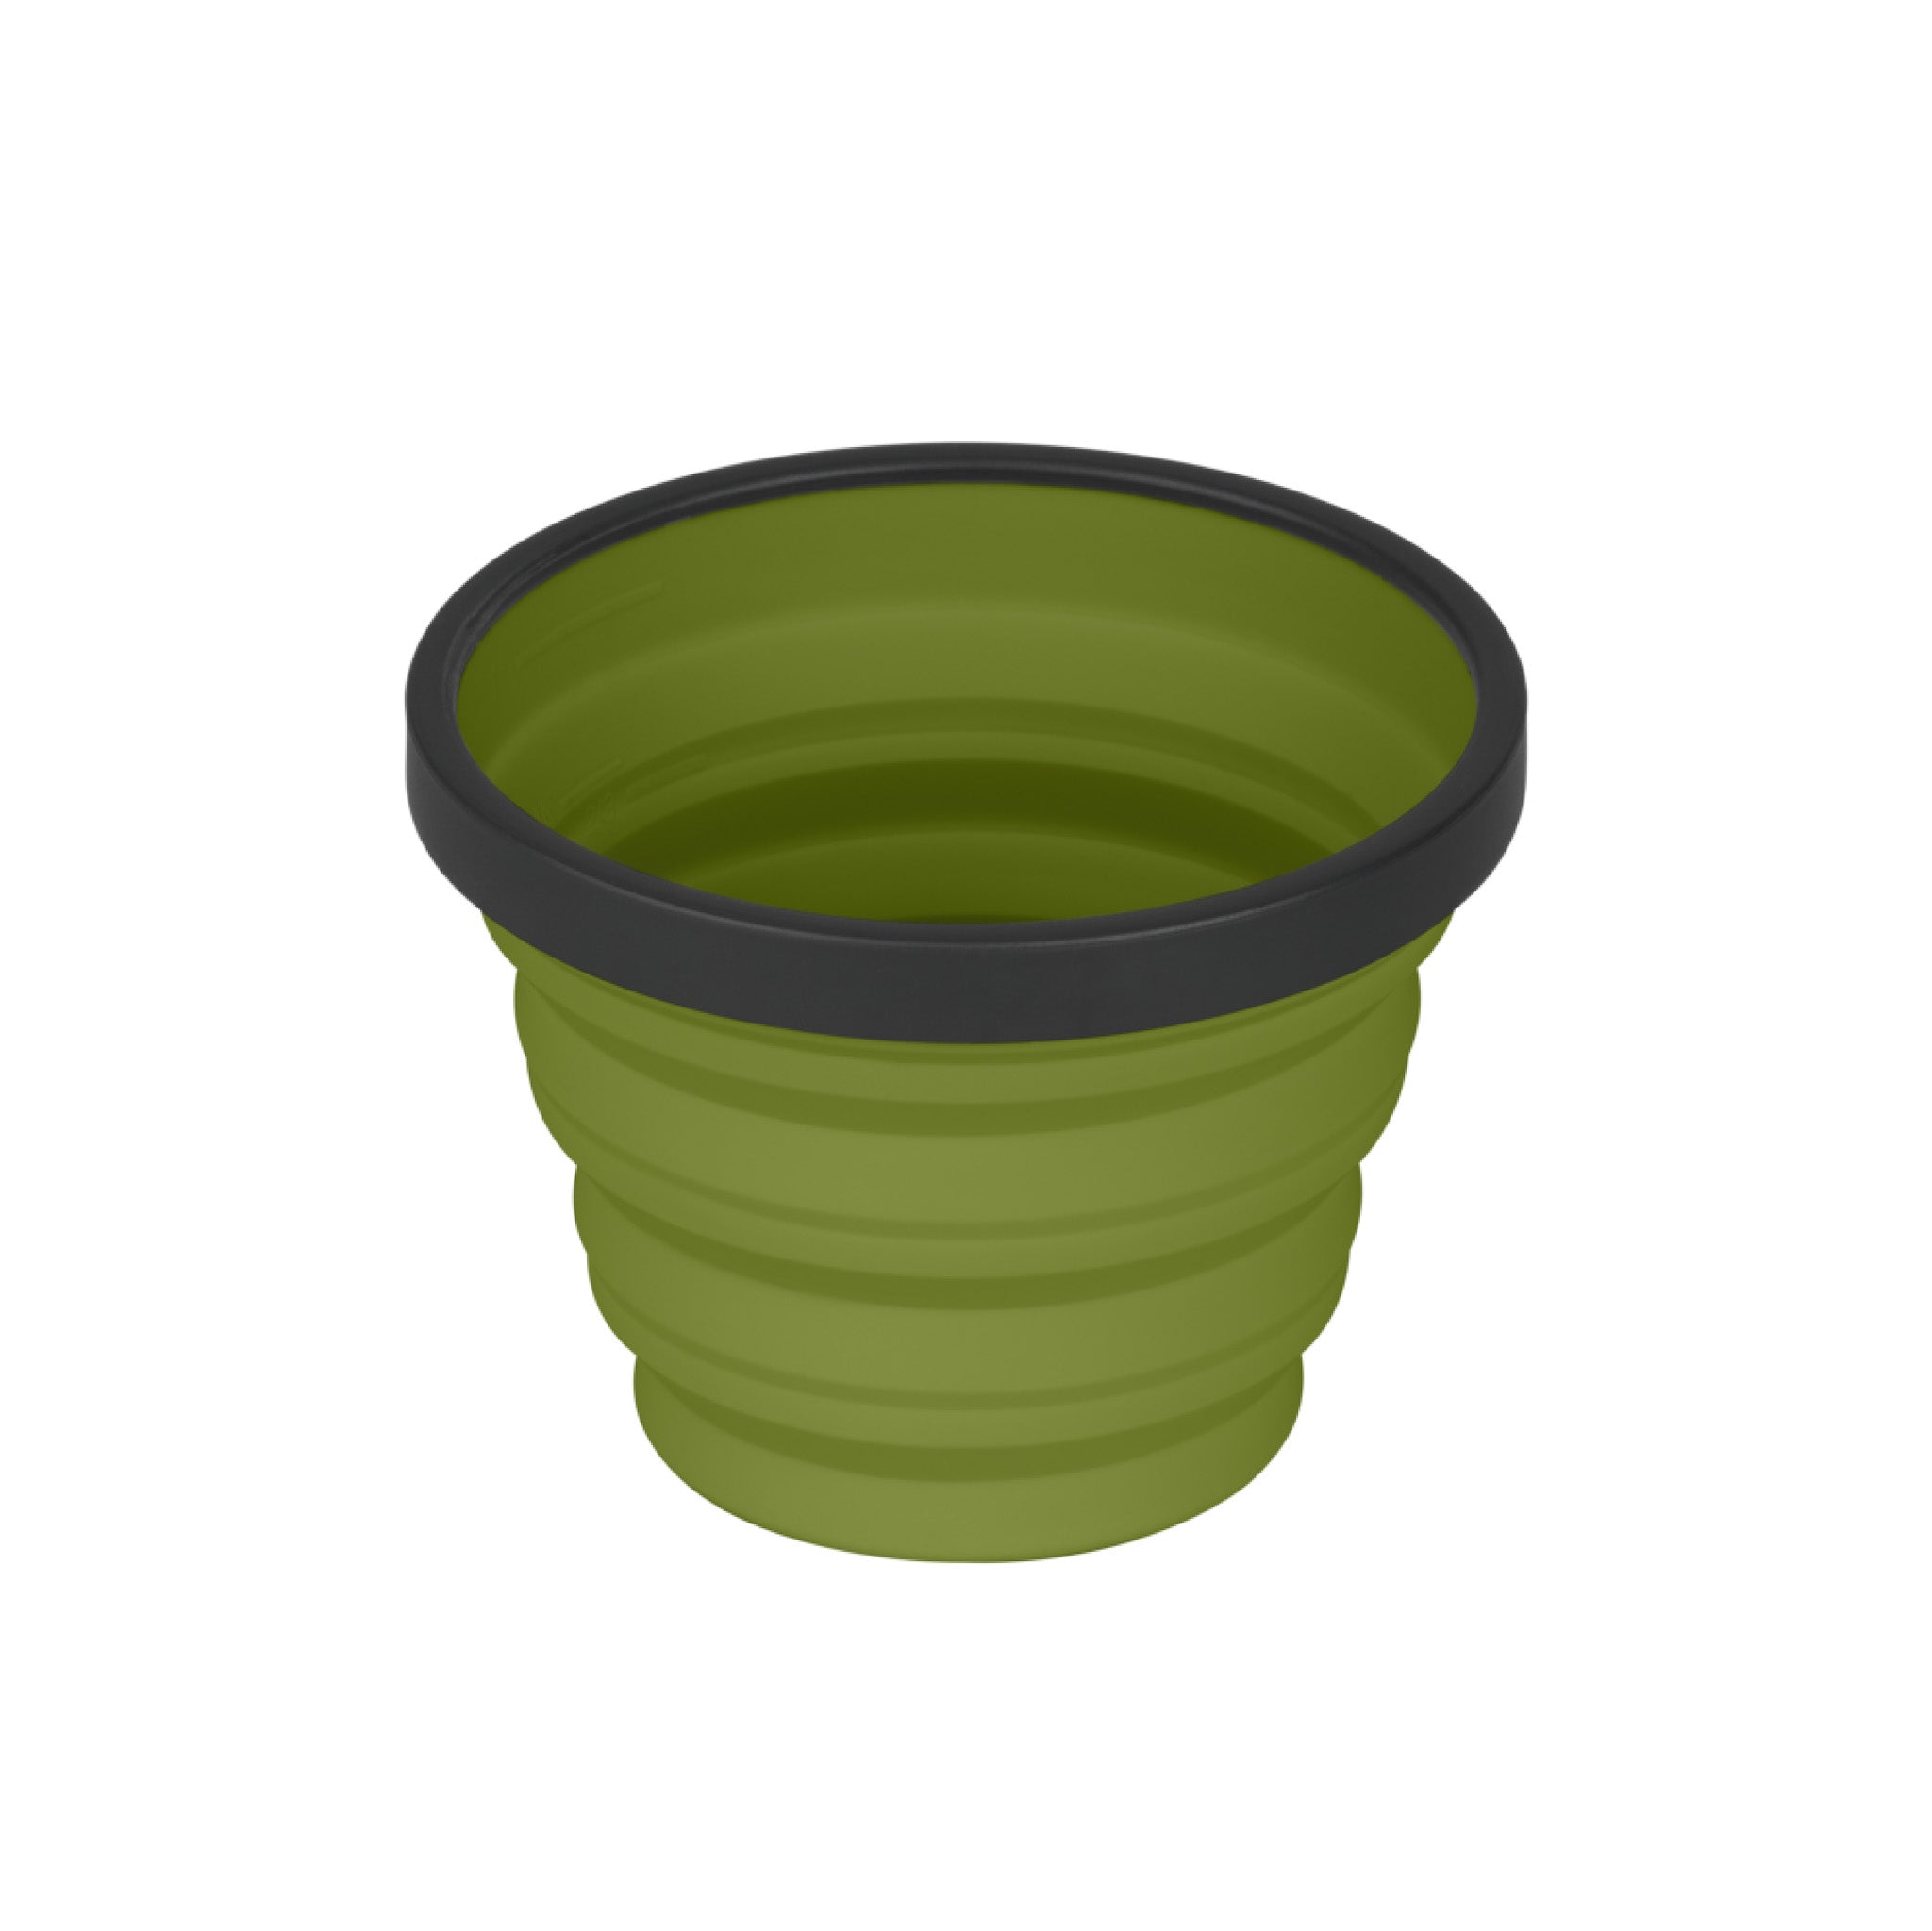 https://cdn.shopify.com/s/files/1/2467/2501/products/collapsible-hot-coffee-tea-camping-cup-olive.jpg?v=1644978621